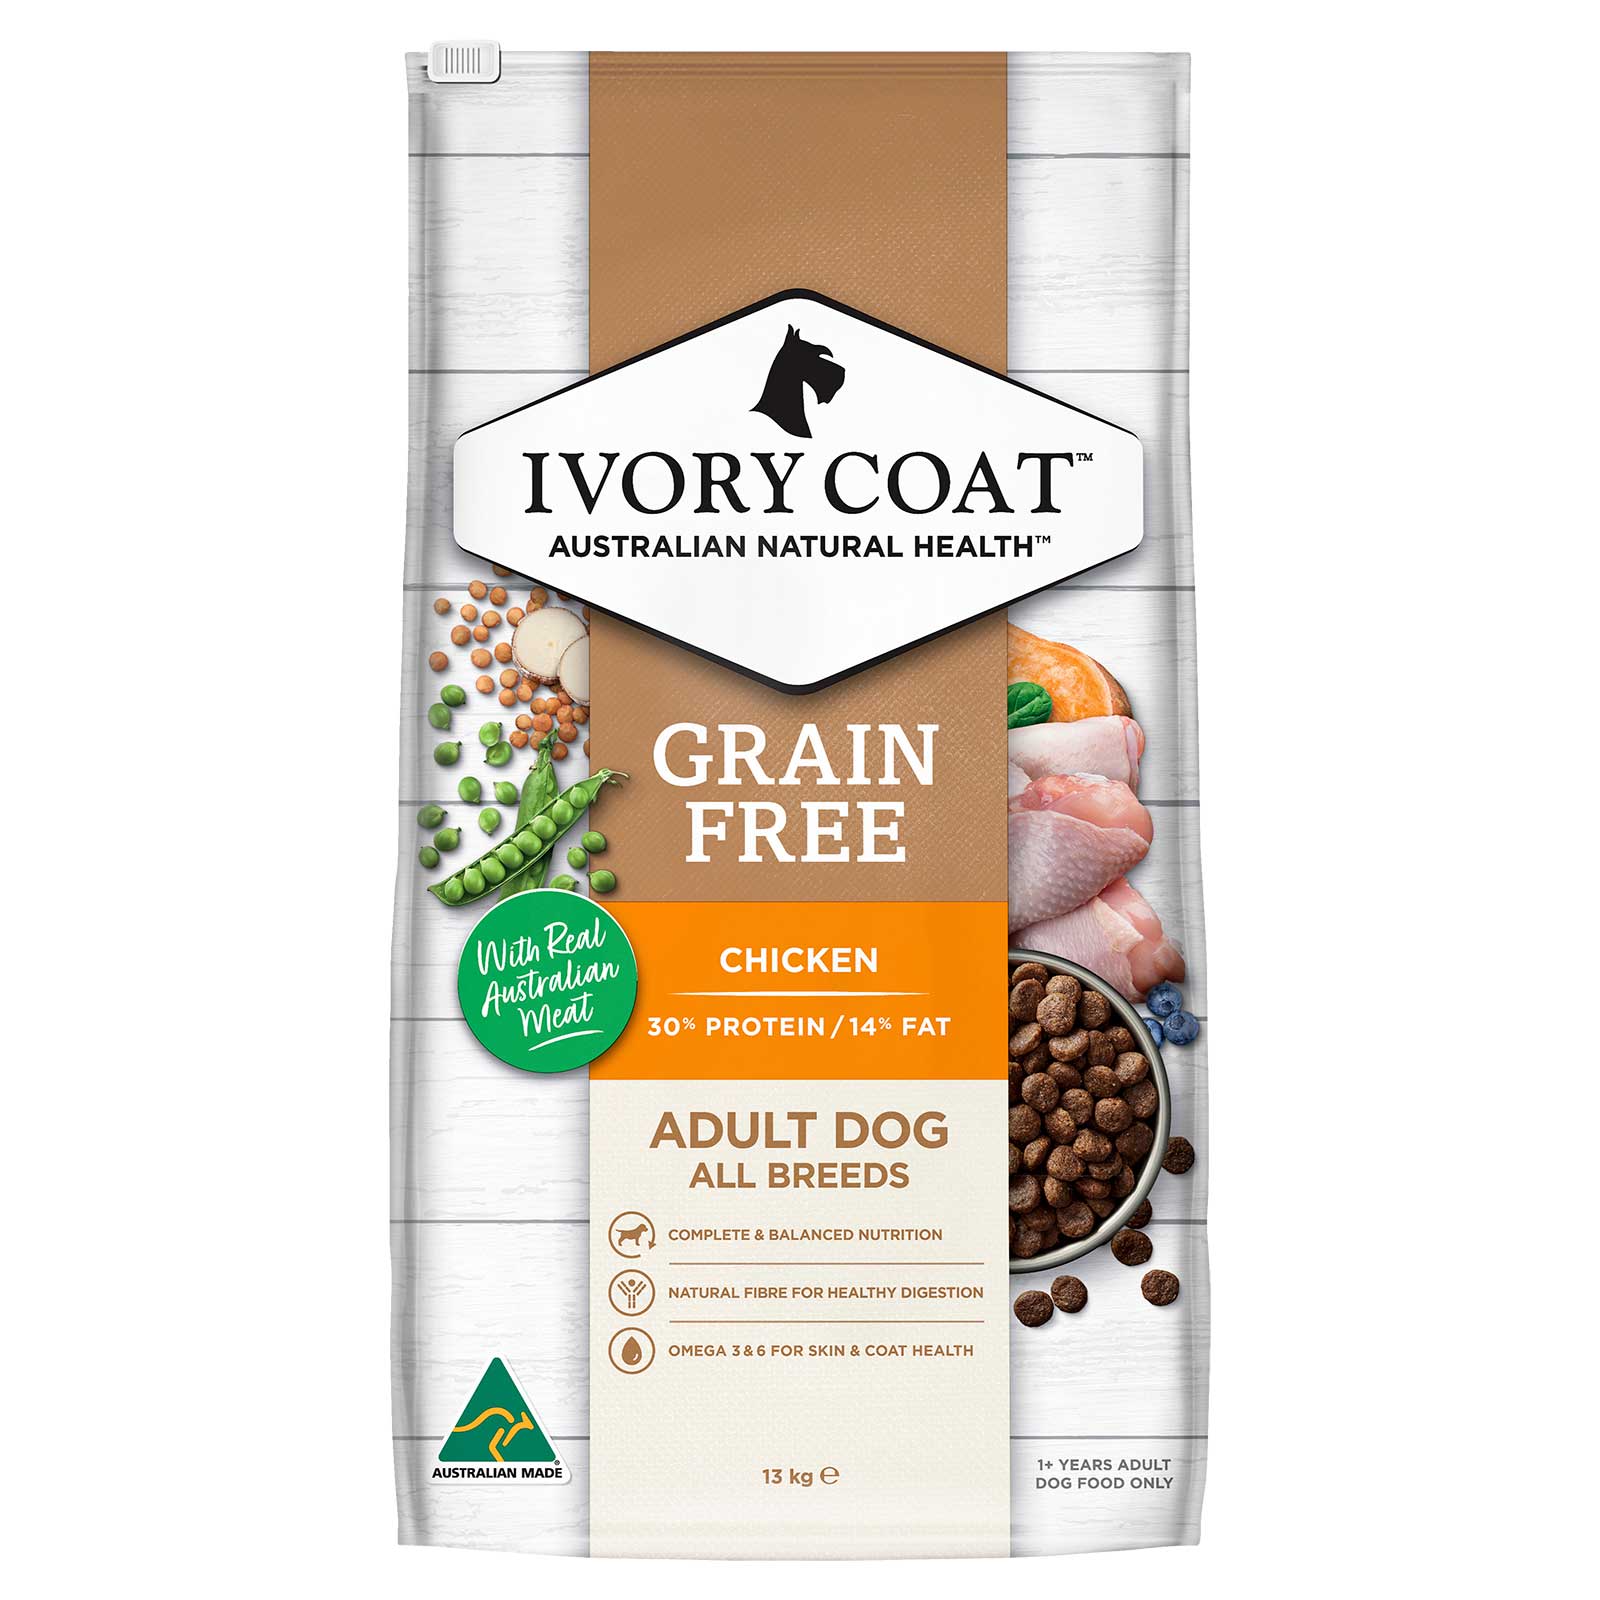 Ivory Coat Grain Free Dog Food Adult Chicken with Coconut Oil